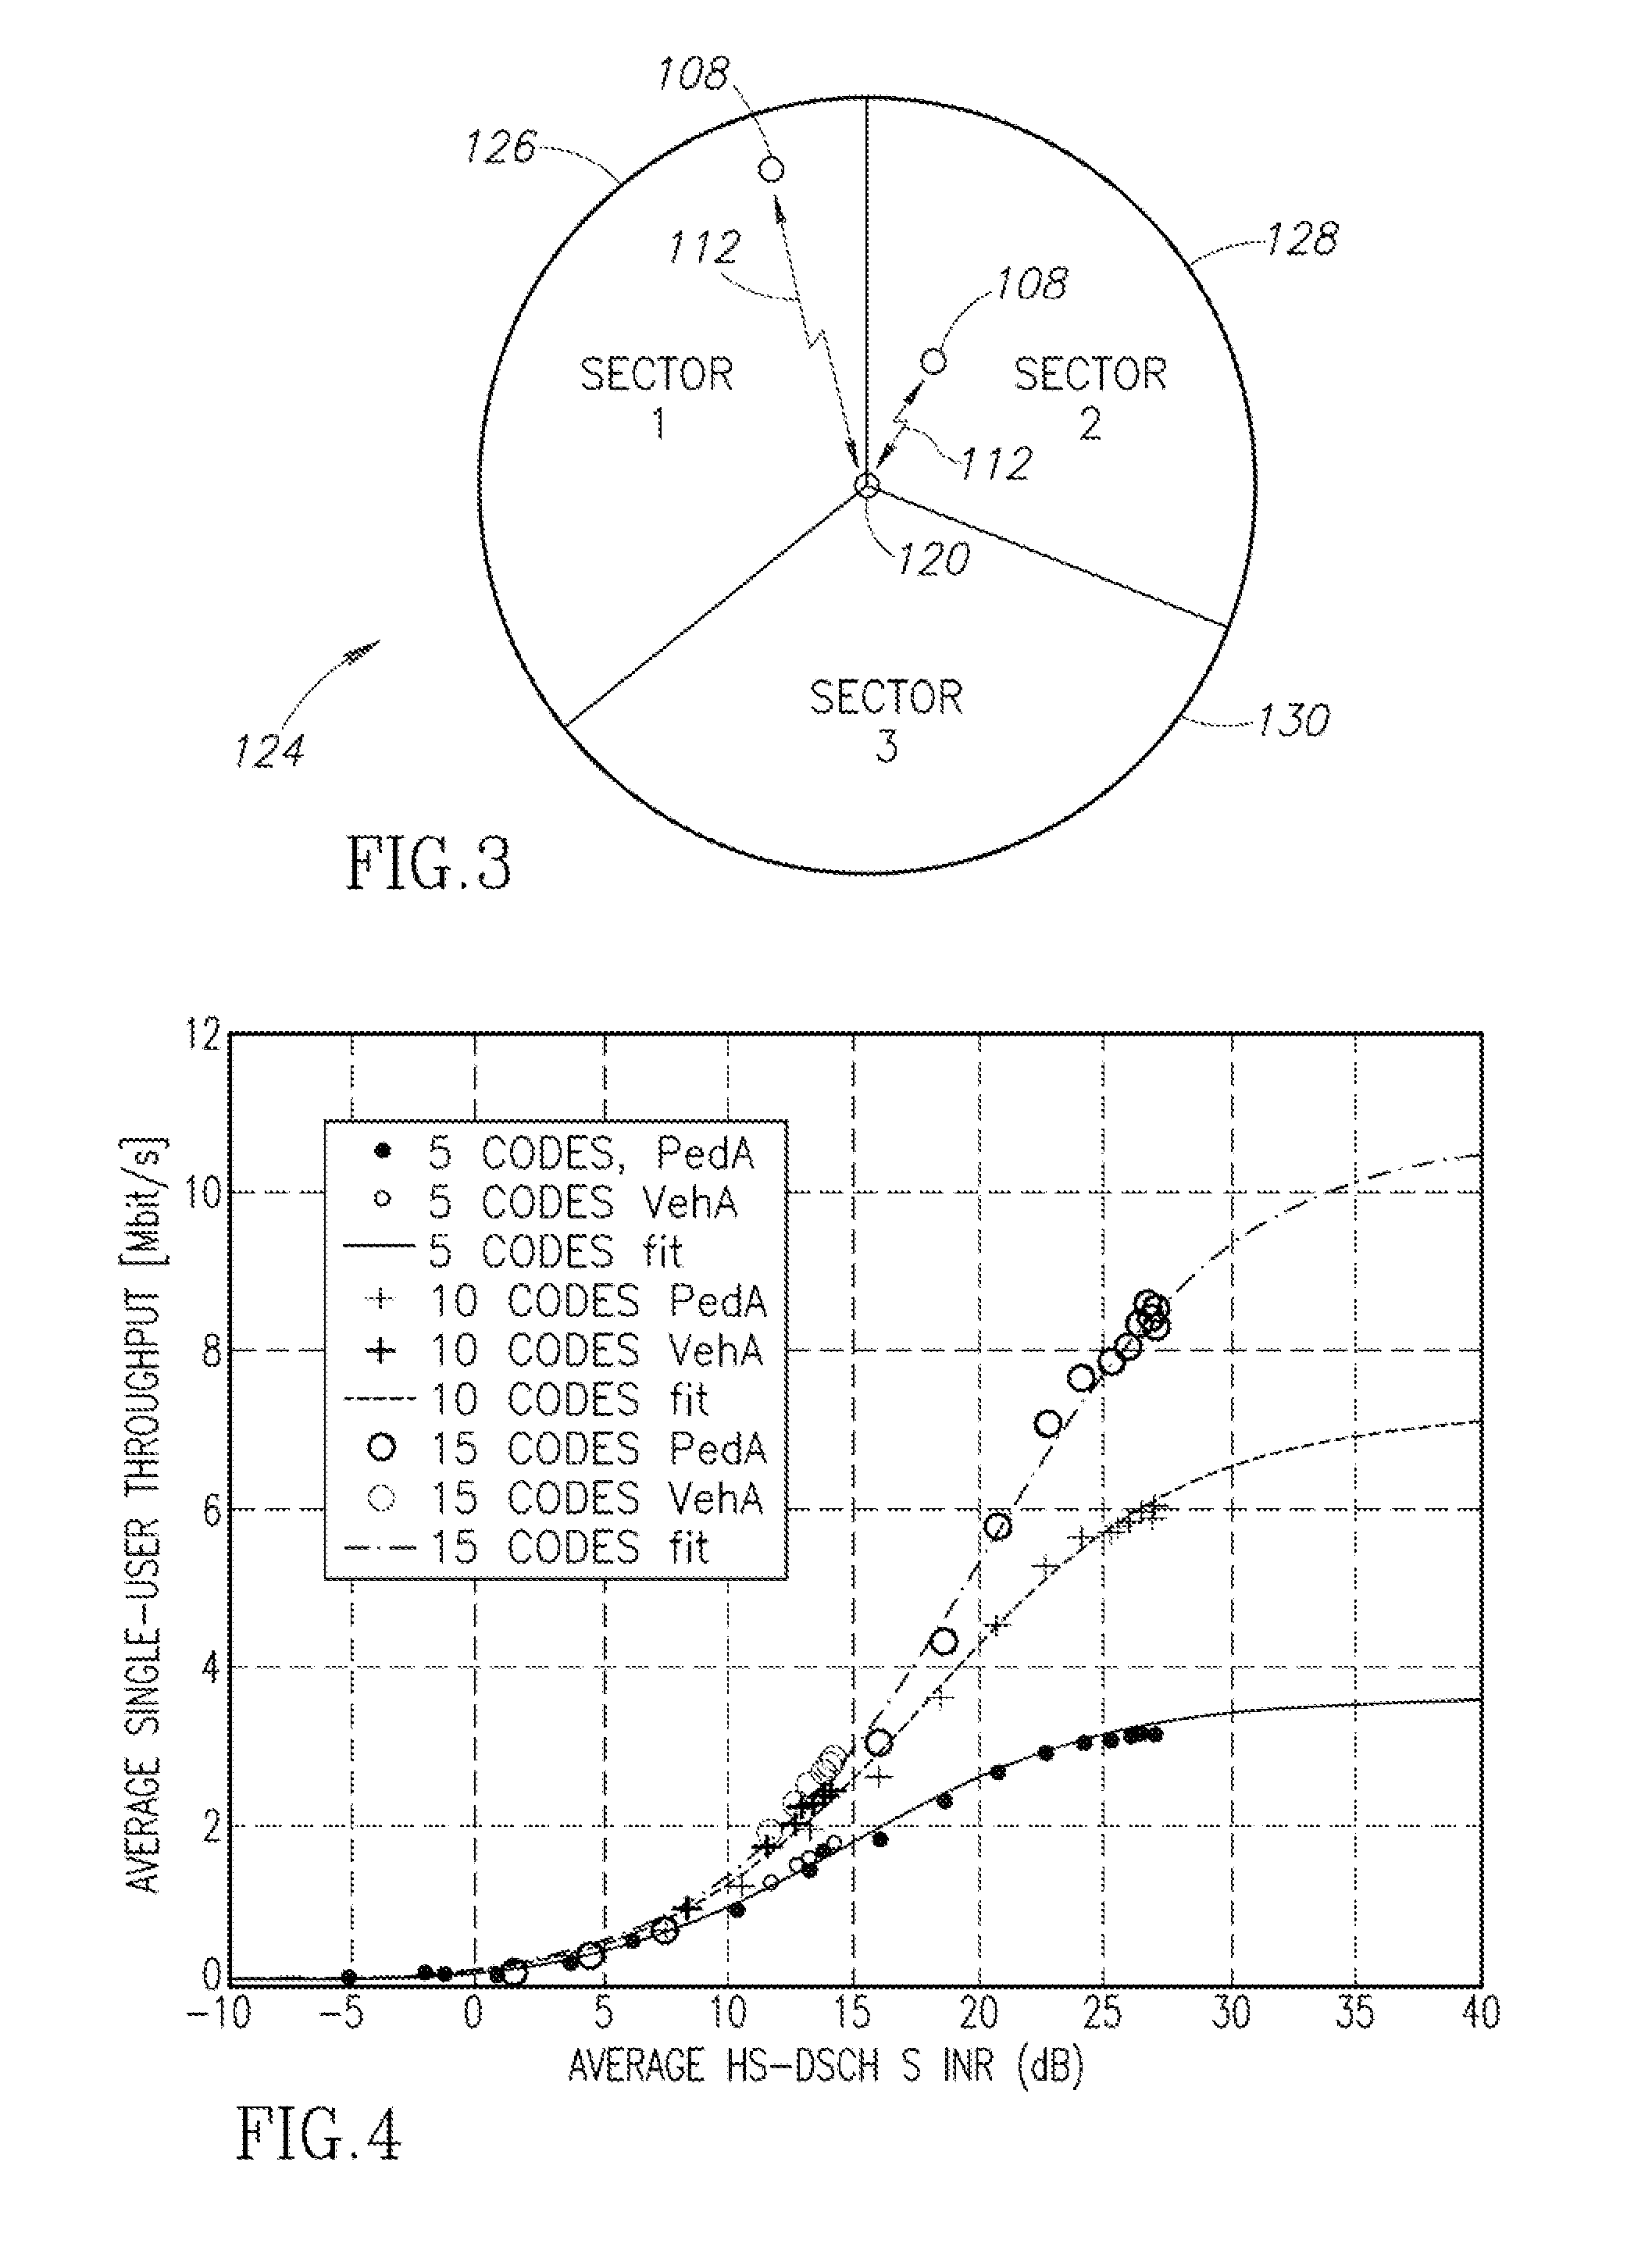 System and method for autonomous discovery of peak channel capacity in a wireless communication network